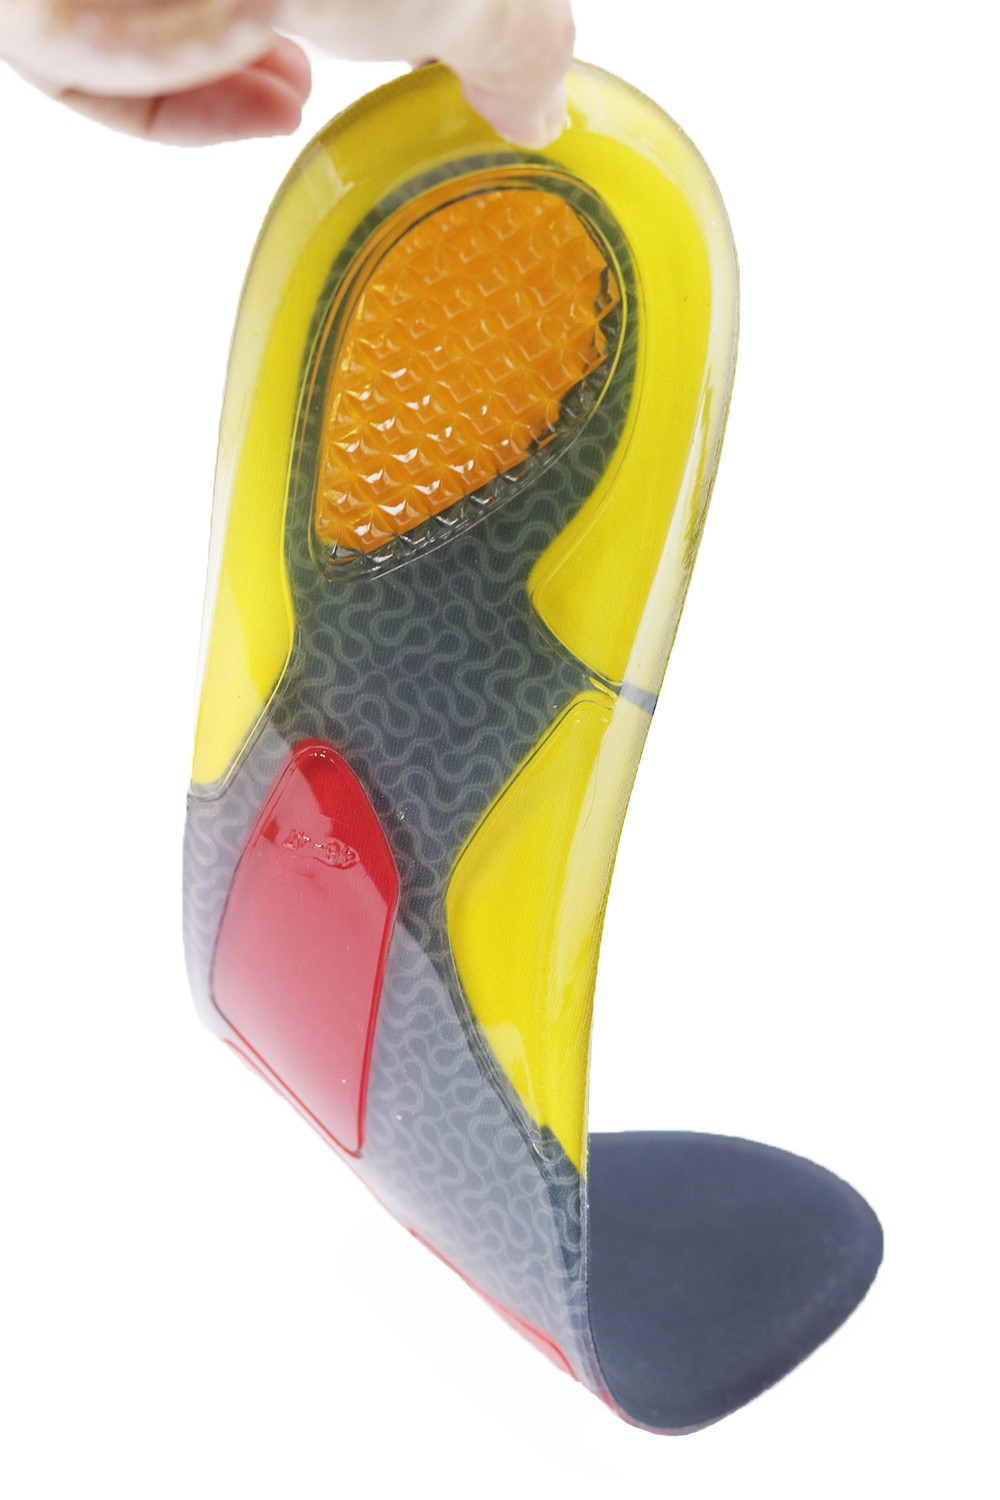 S-King gel insoles for shoes factory for foot care-5